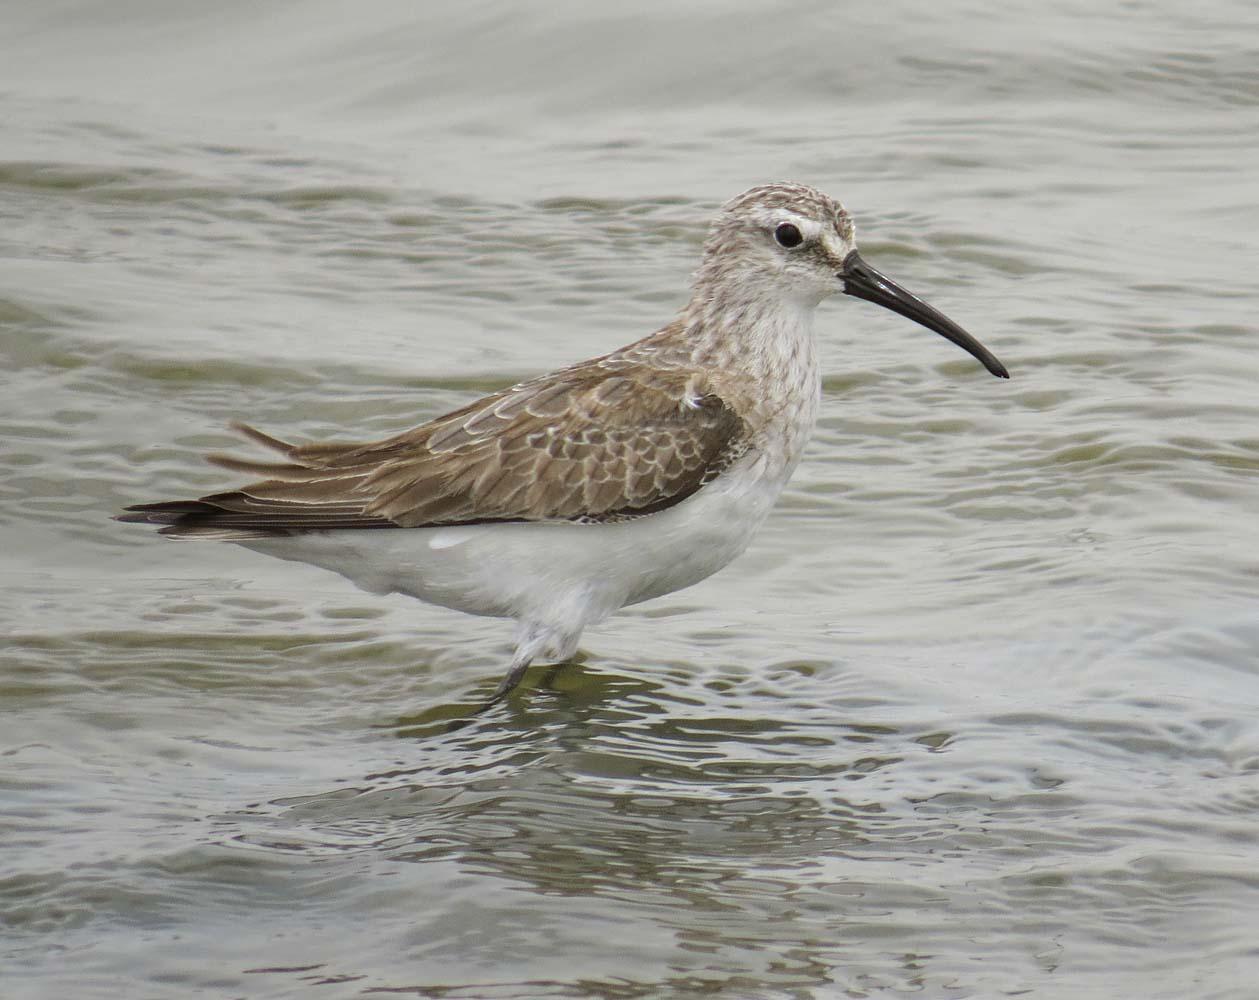 Curlew Sandpiper Photo by Peter Boesman